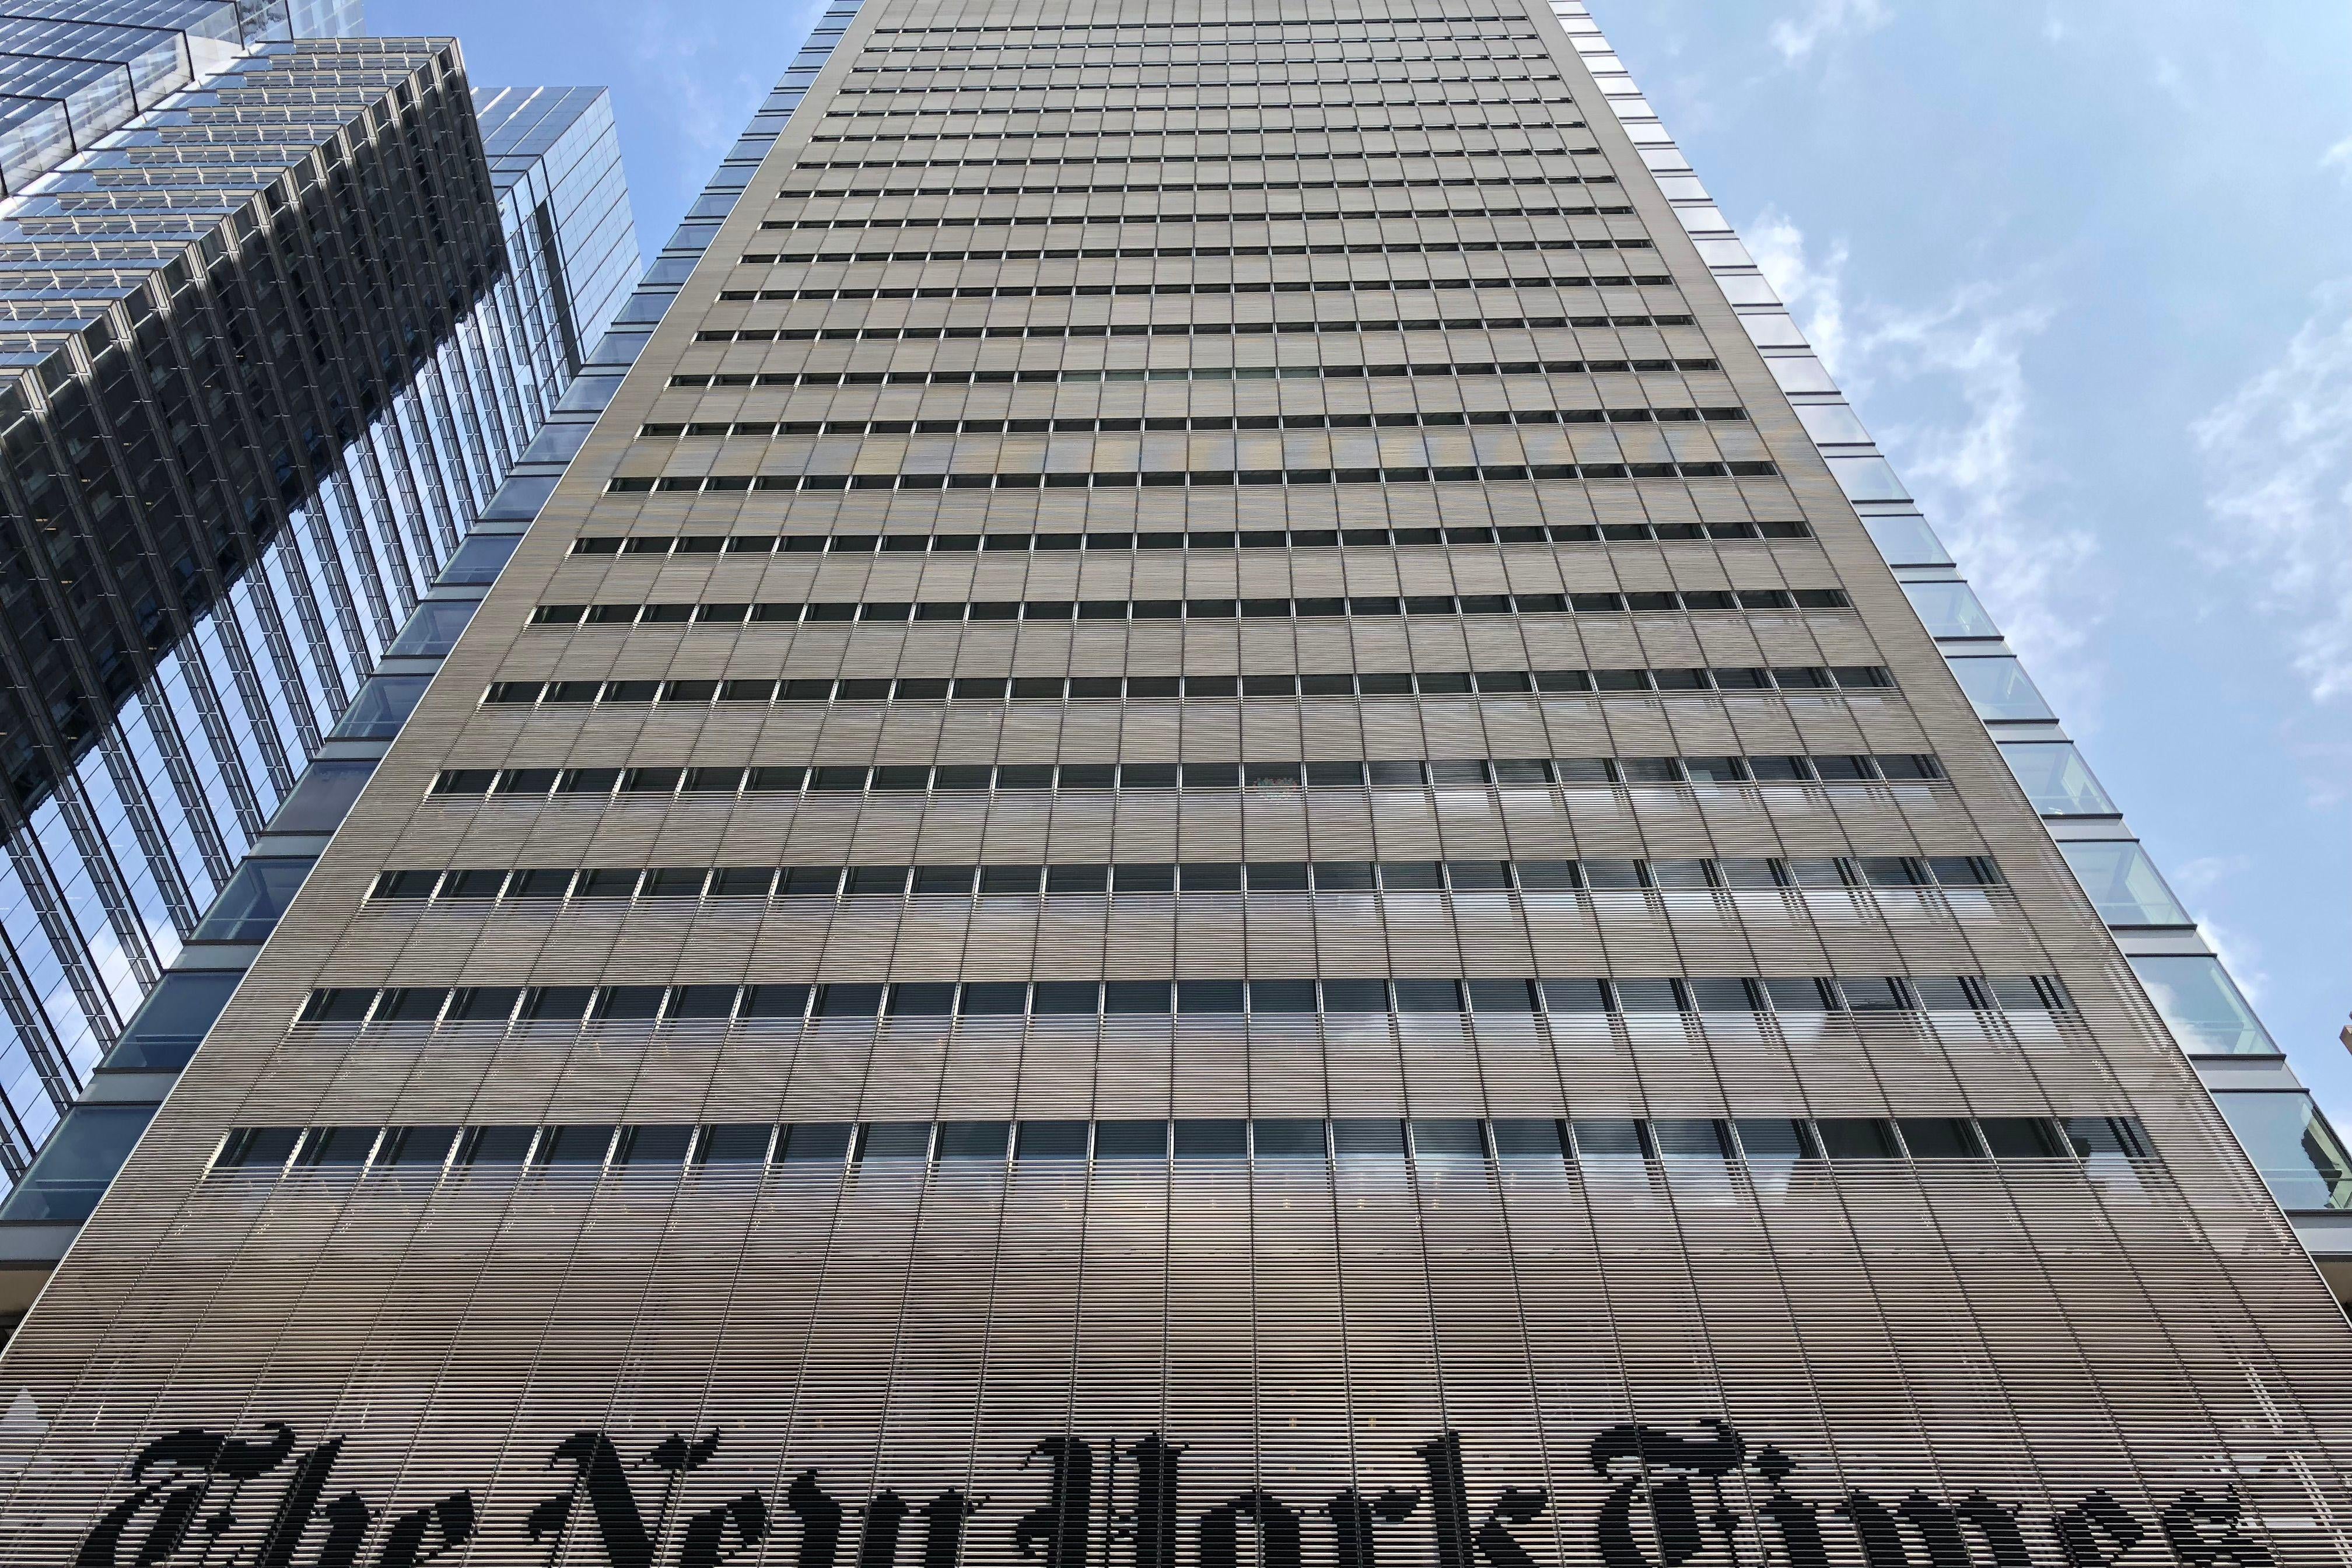 The New York Times building on 8th Avenue is seen Aug. 21, 2018 in New York City.